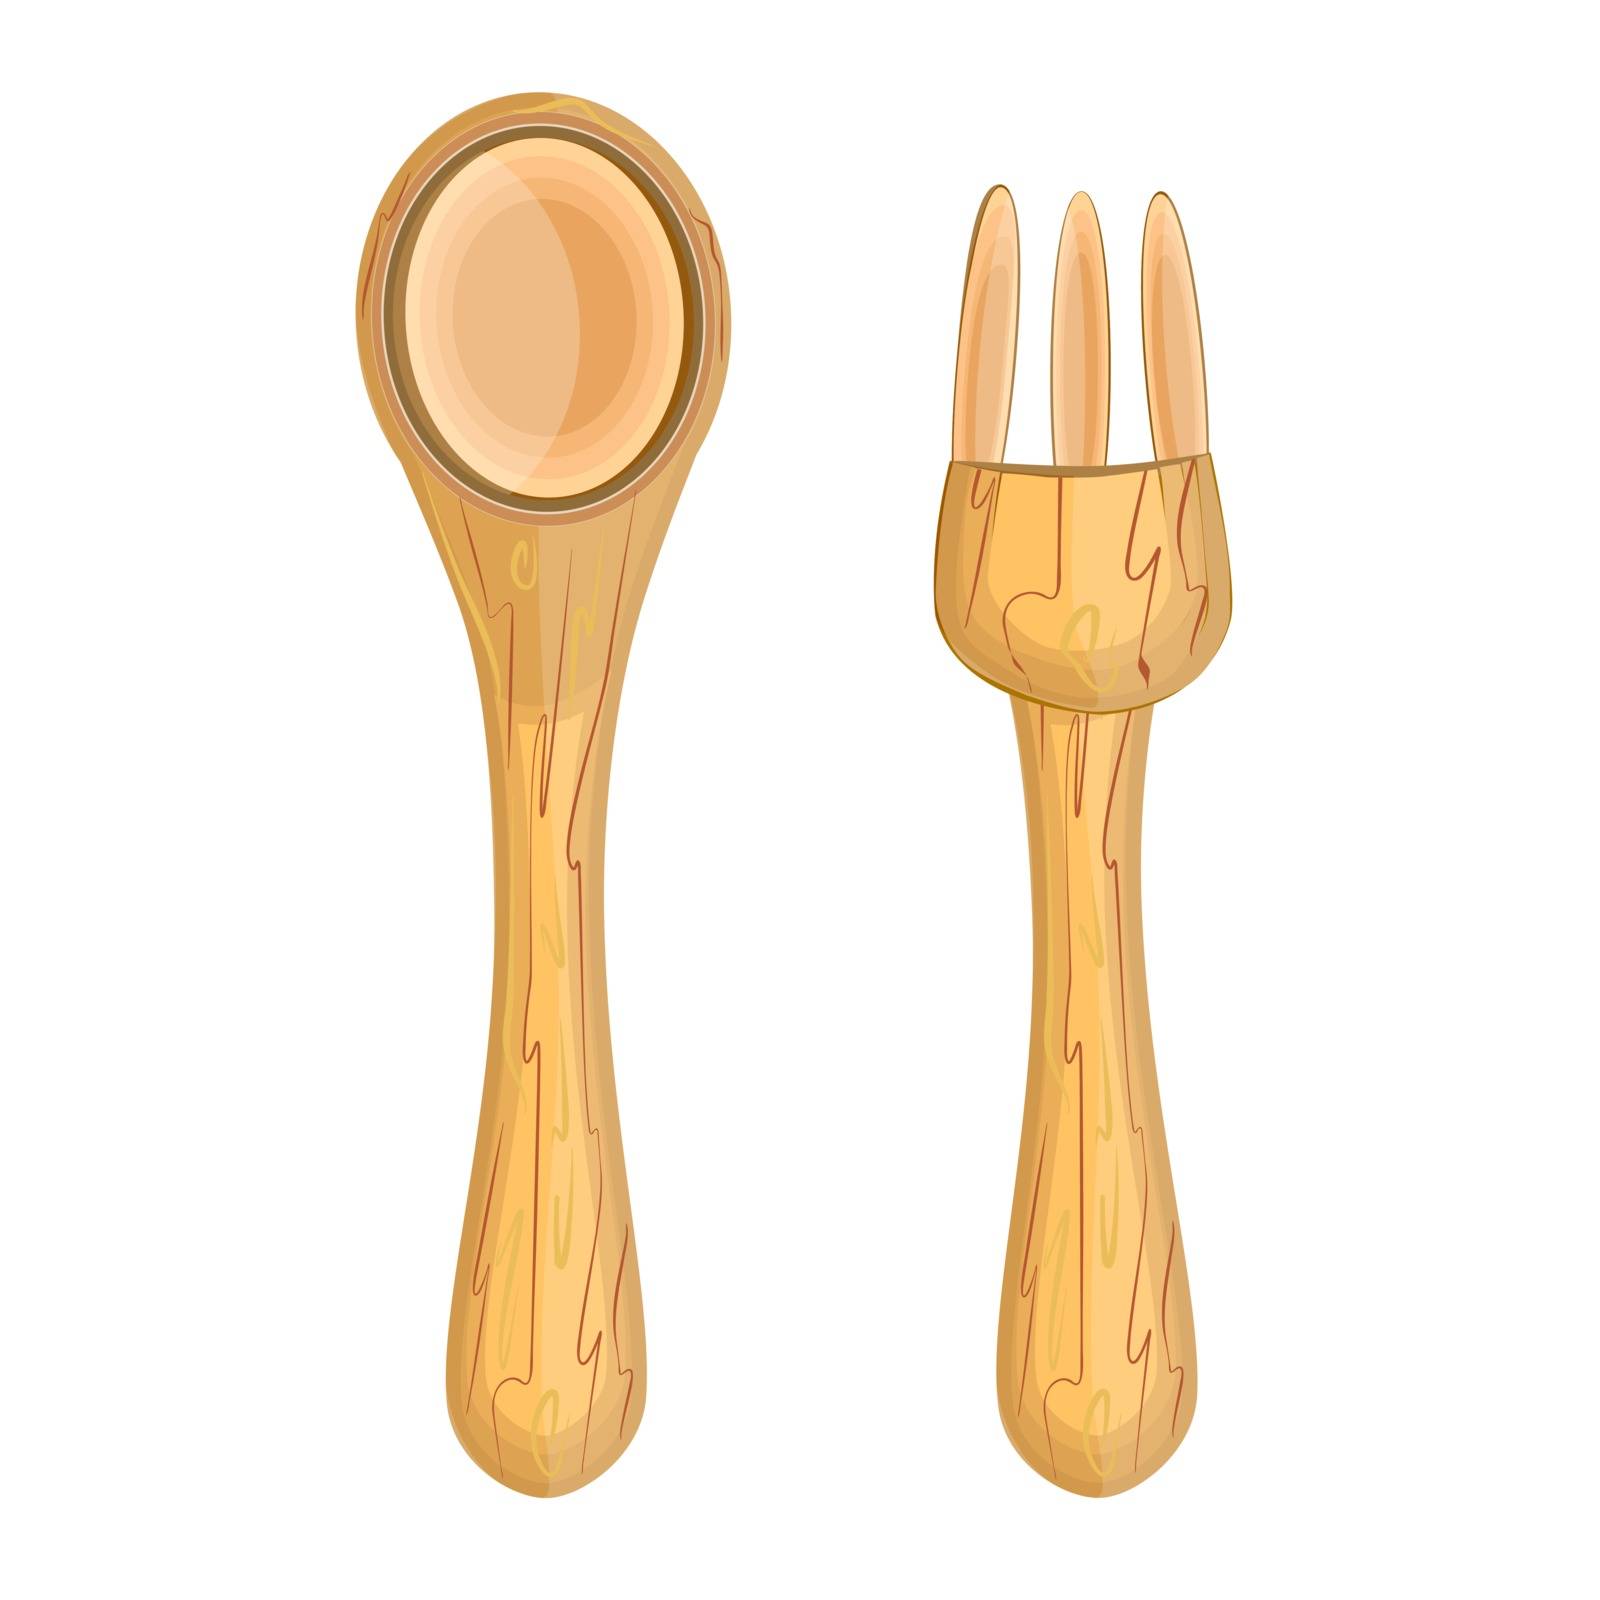 Set of bamboo flatware icon top view. Bamboo disposable biodegradable table cutlery. Natural eco recycle reusable material utensils. Stock vector illustration